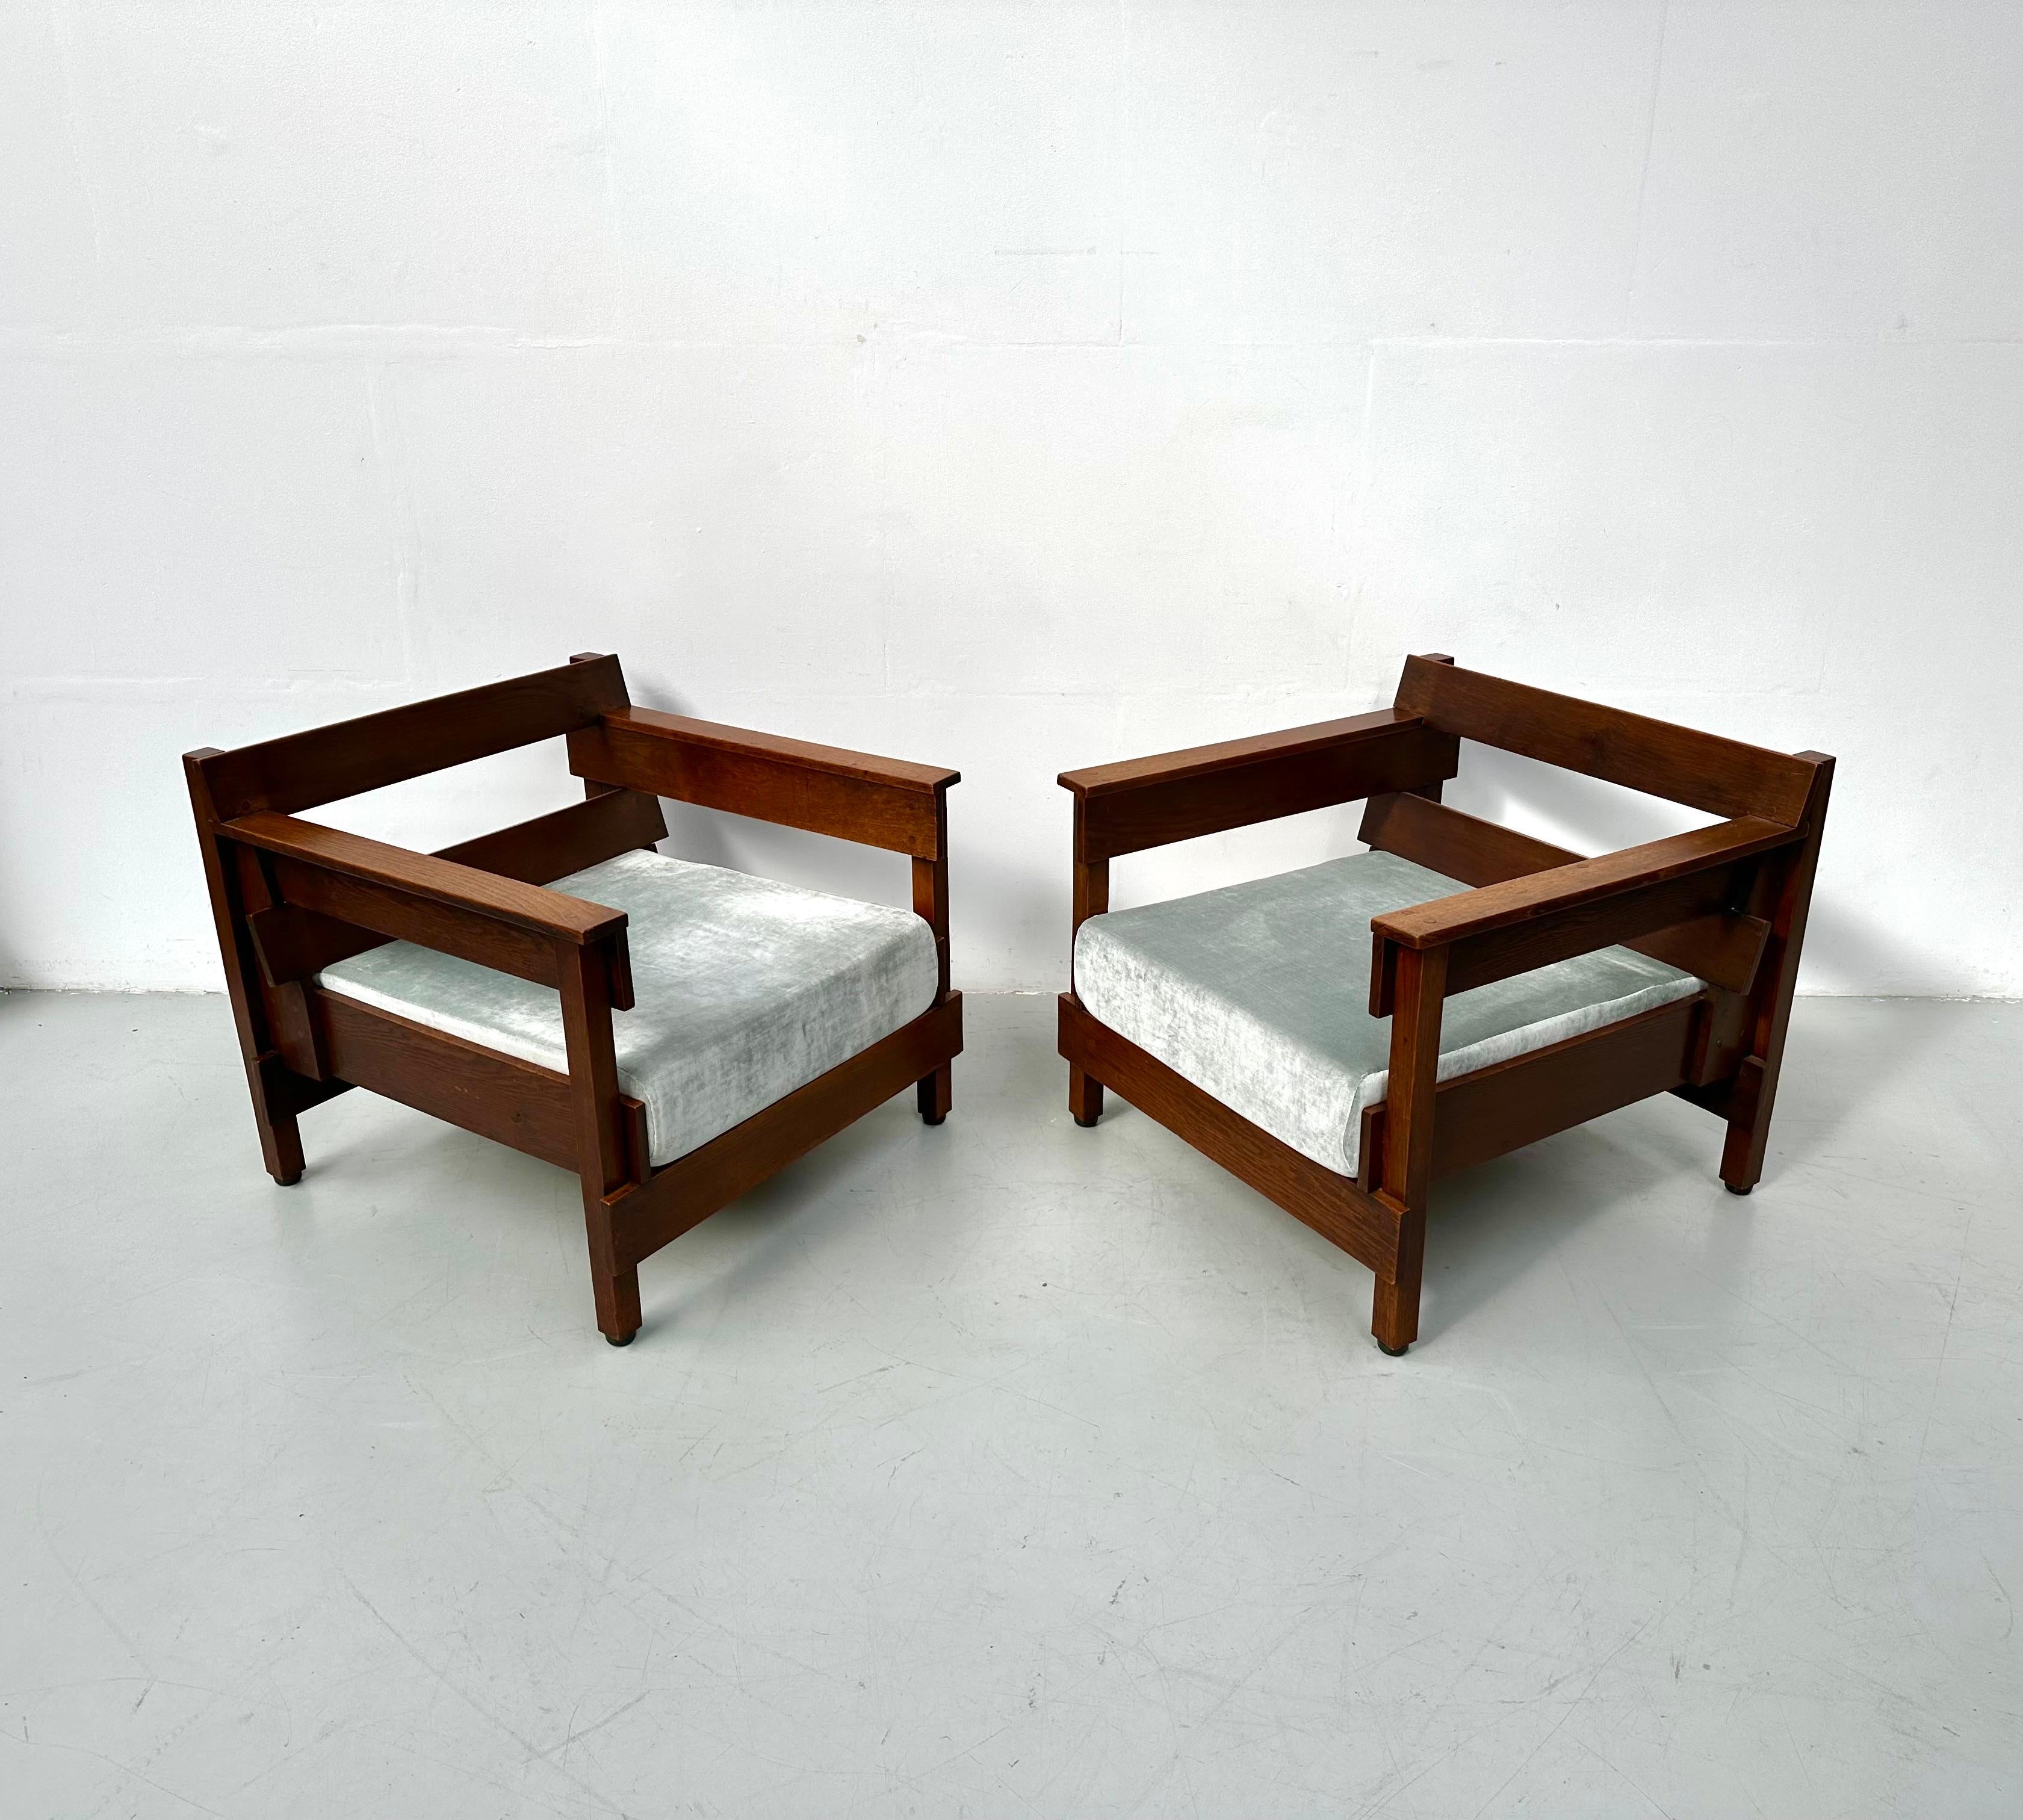 Dutch Mid Century Brutalist Oak Armchairs by Paul Bromberg for Metz & Co, 1950s. 7